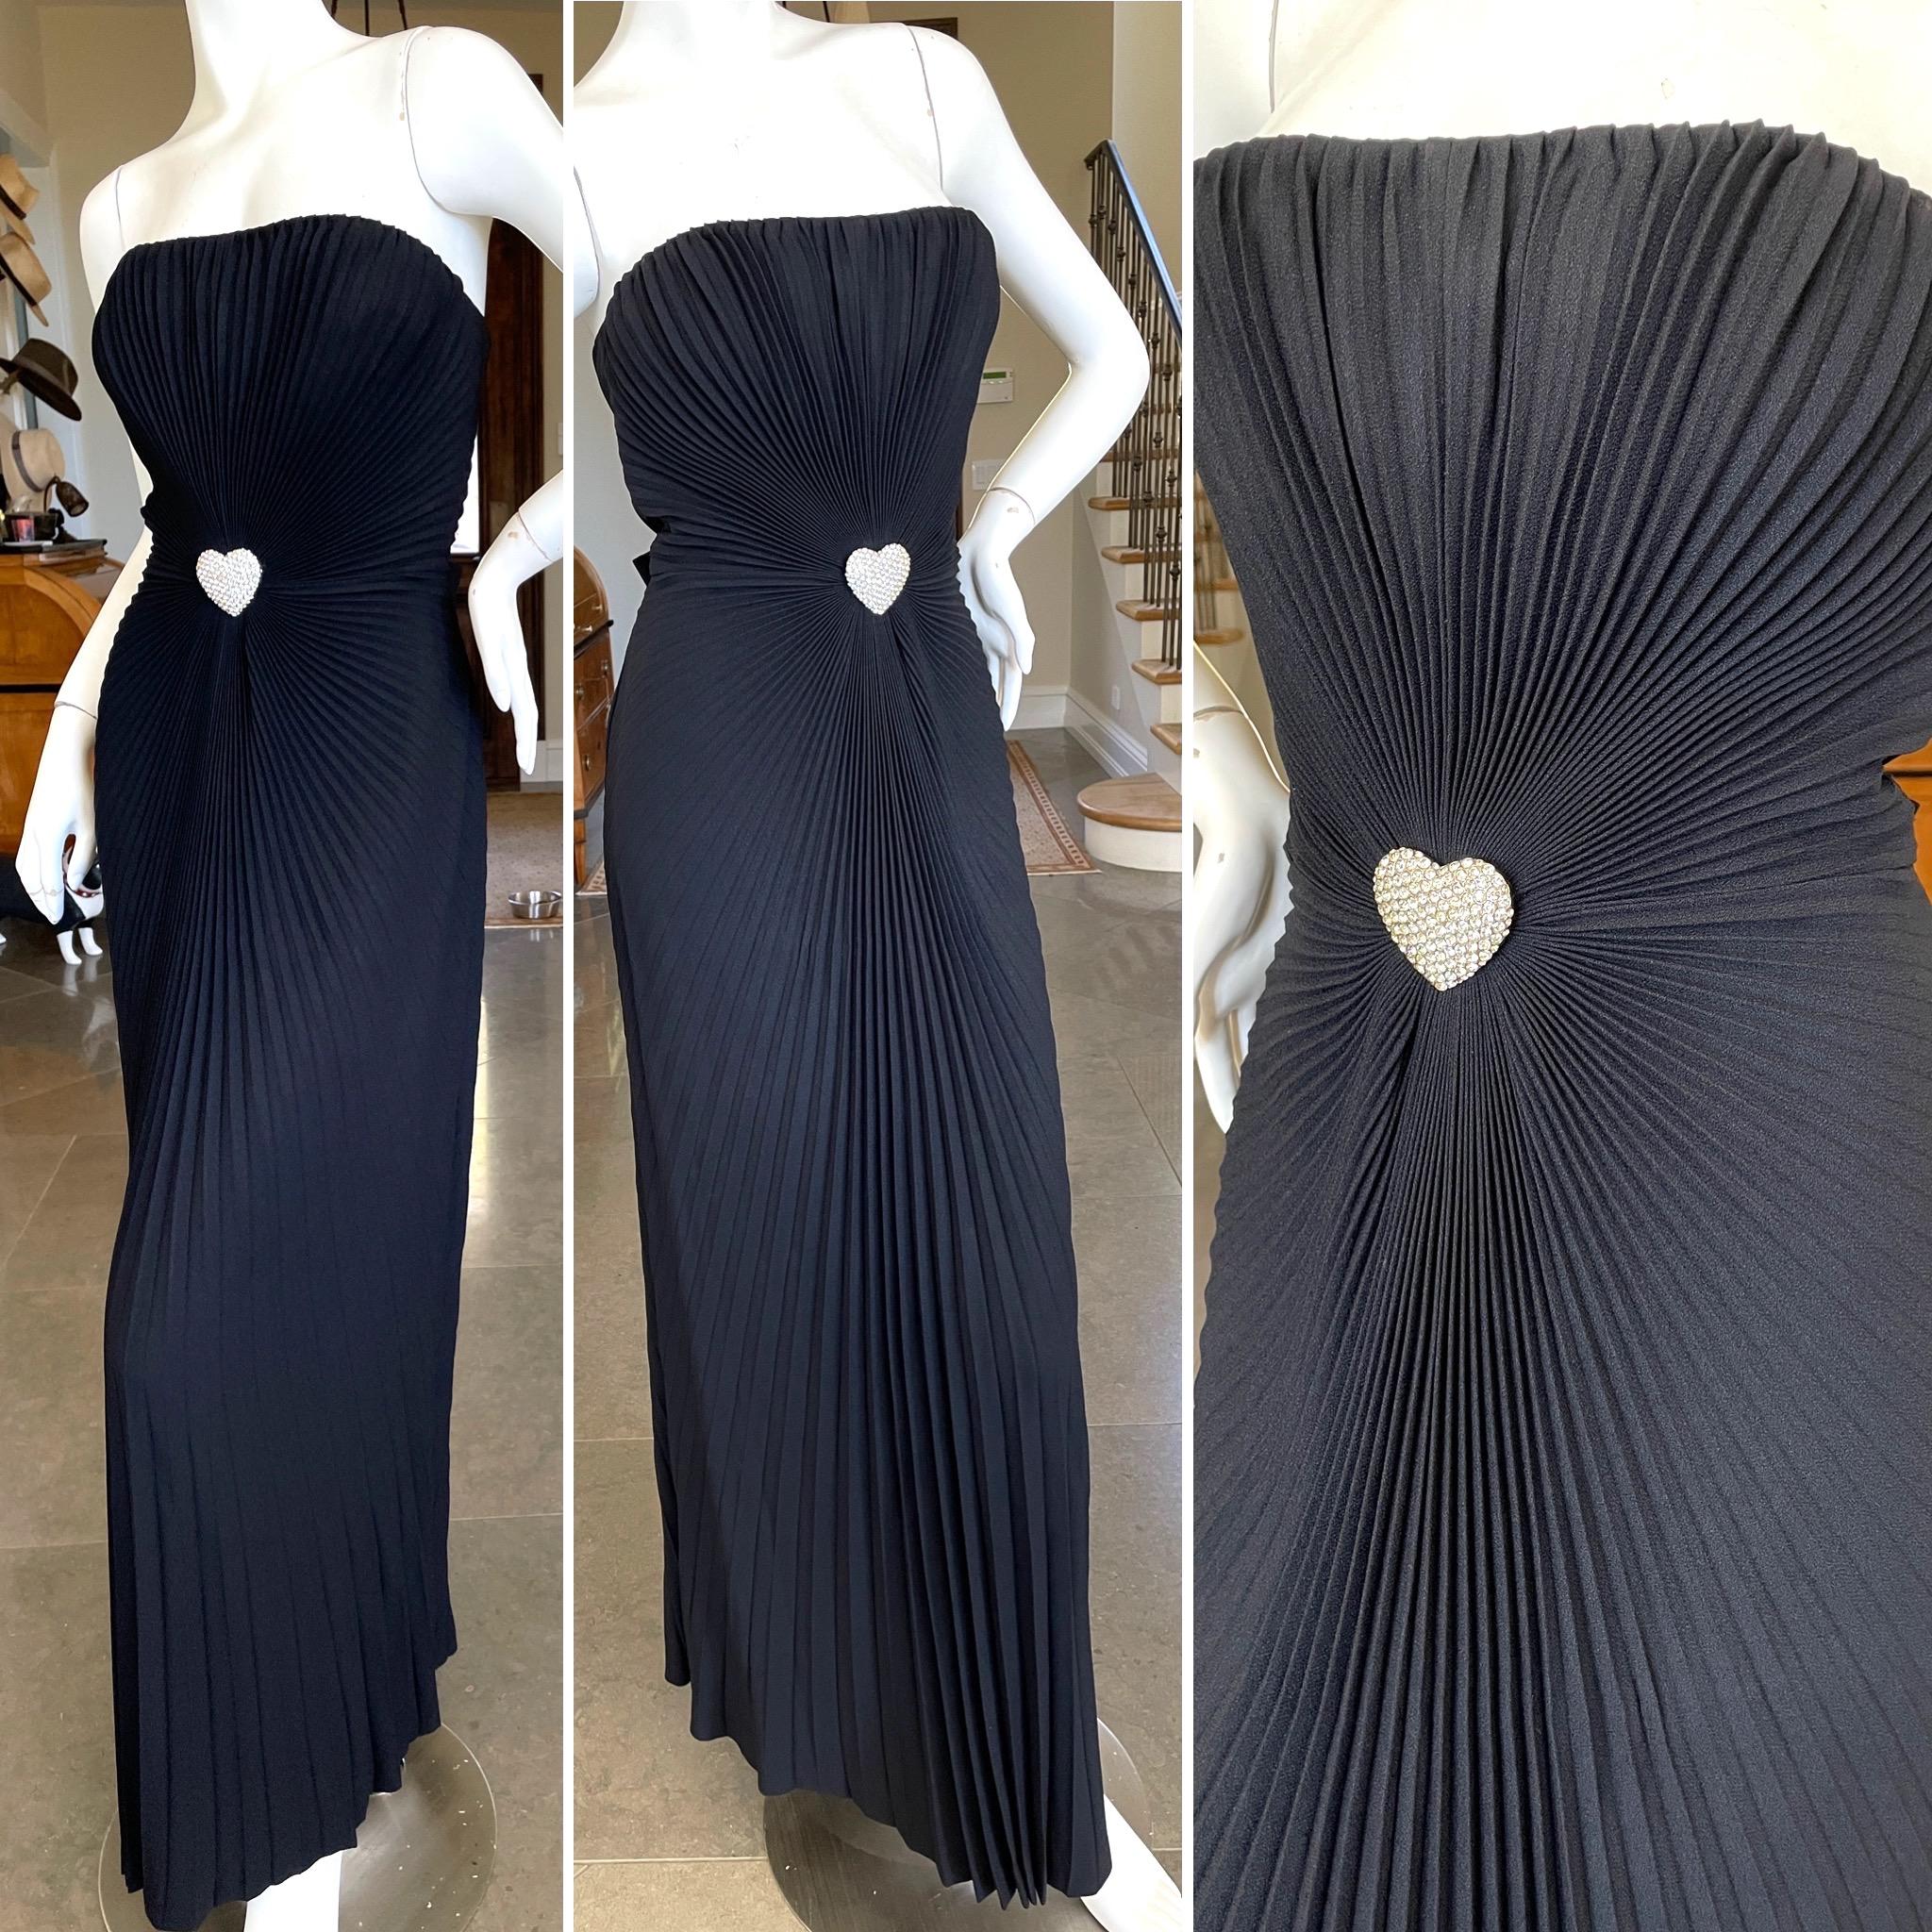 Loris Azzaro Couture 80's Strapless Pleated Evening Dress w Crystal Heart Accent.
Inner corset with bra 
This is so wonderful, please use the zoom feature to see details.
No size tag, estimate French size 36-38
 Bust 35